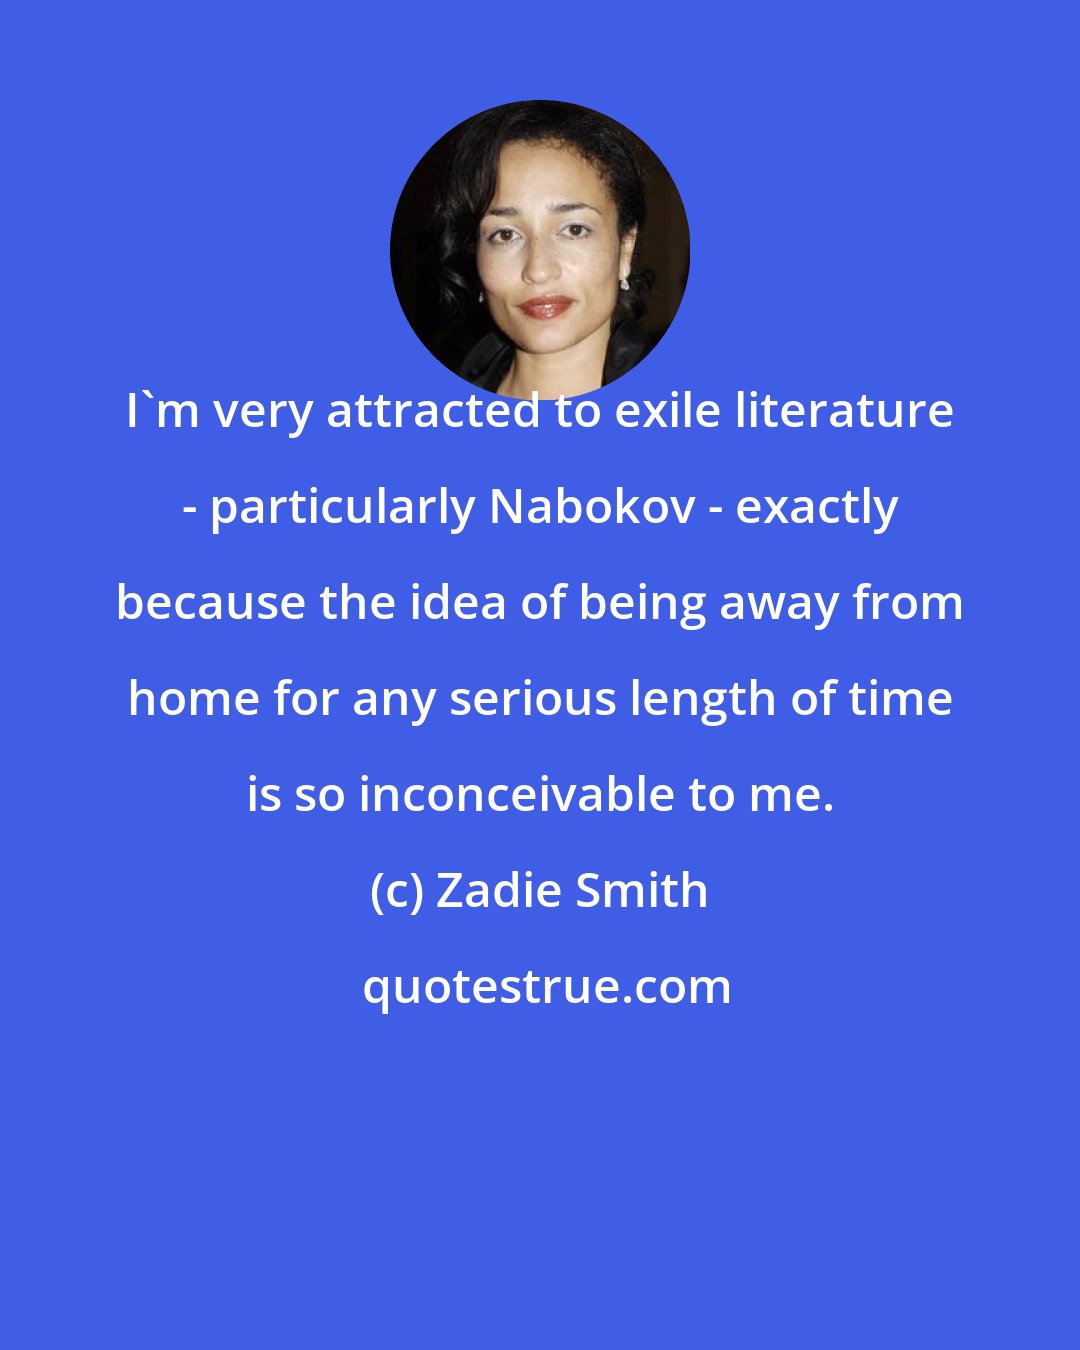 Zadie Smith: I'm very attracted to exile literature - particularly Nabokov - exactly because the idea of being away from home for any serious length of time is so inconceivable to me.